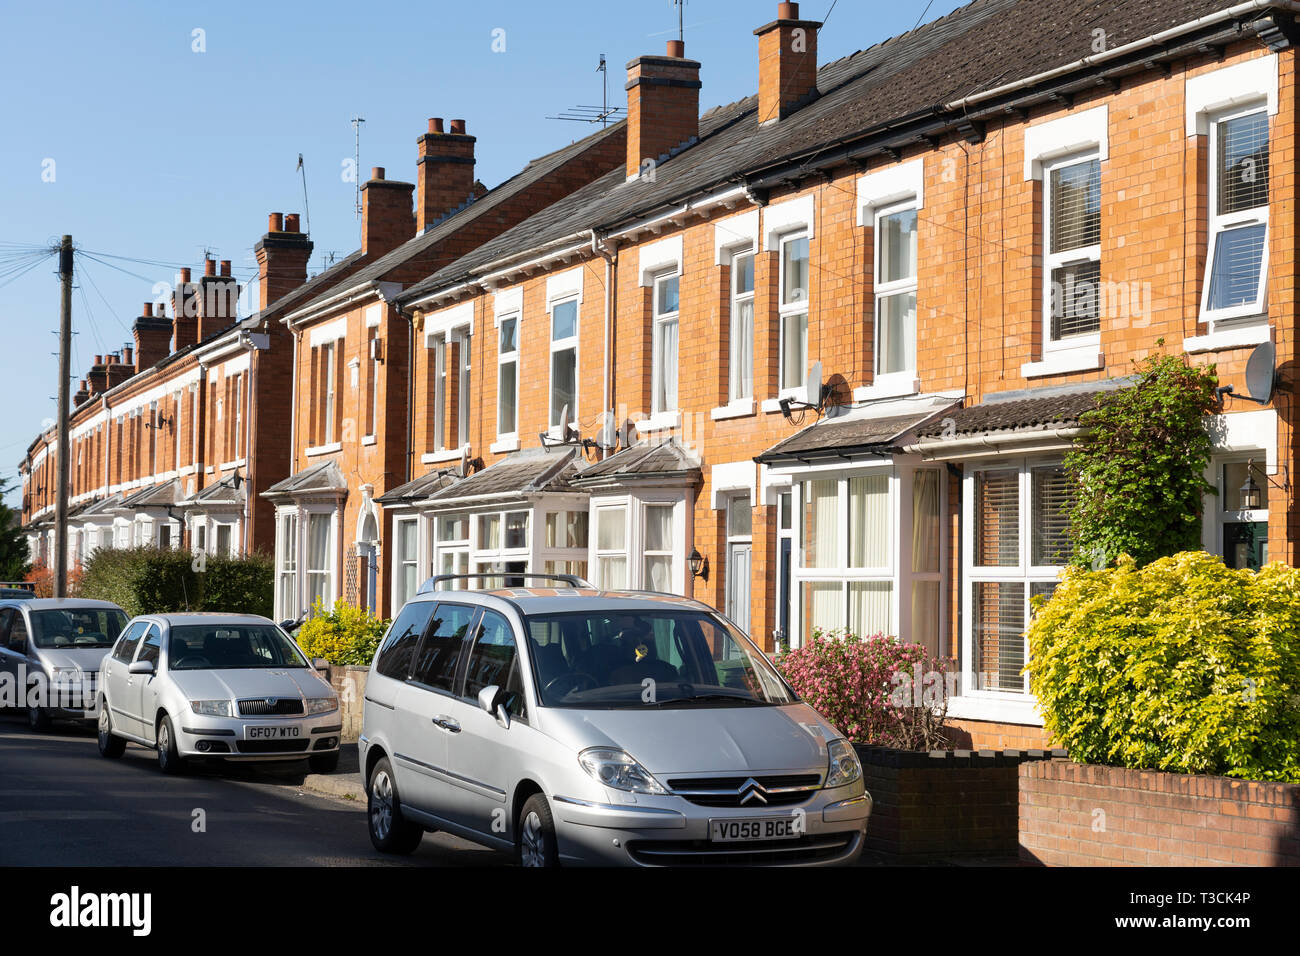 Terraced brick housing, concept - the UK housing market, economy, house prices, renting, mortgages, rental market, letting, landlords Stock Photo